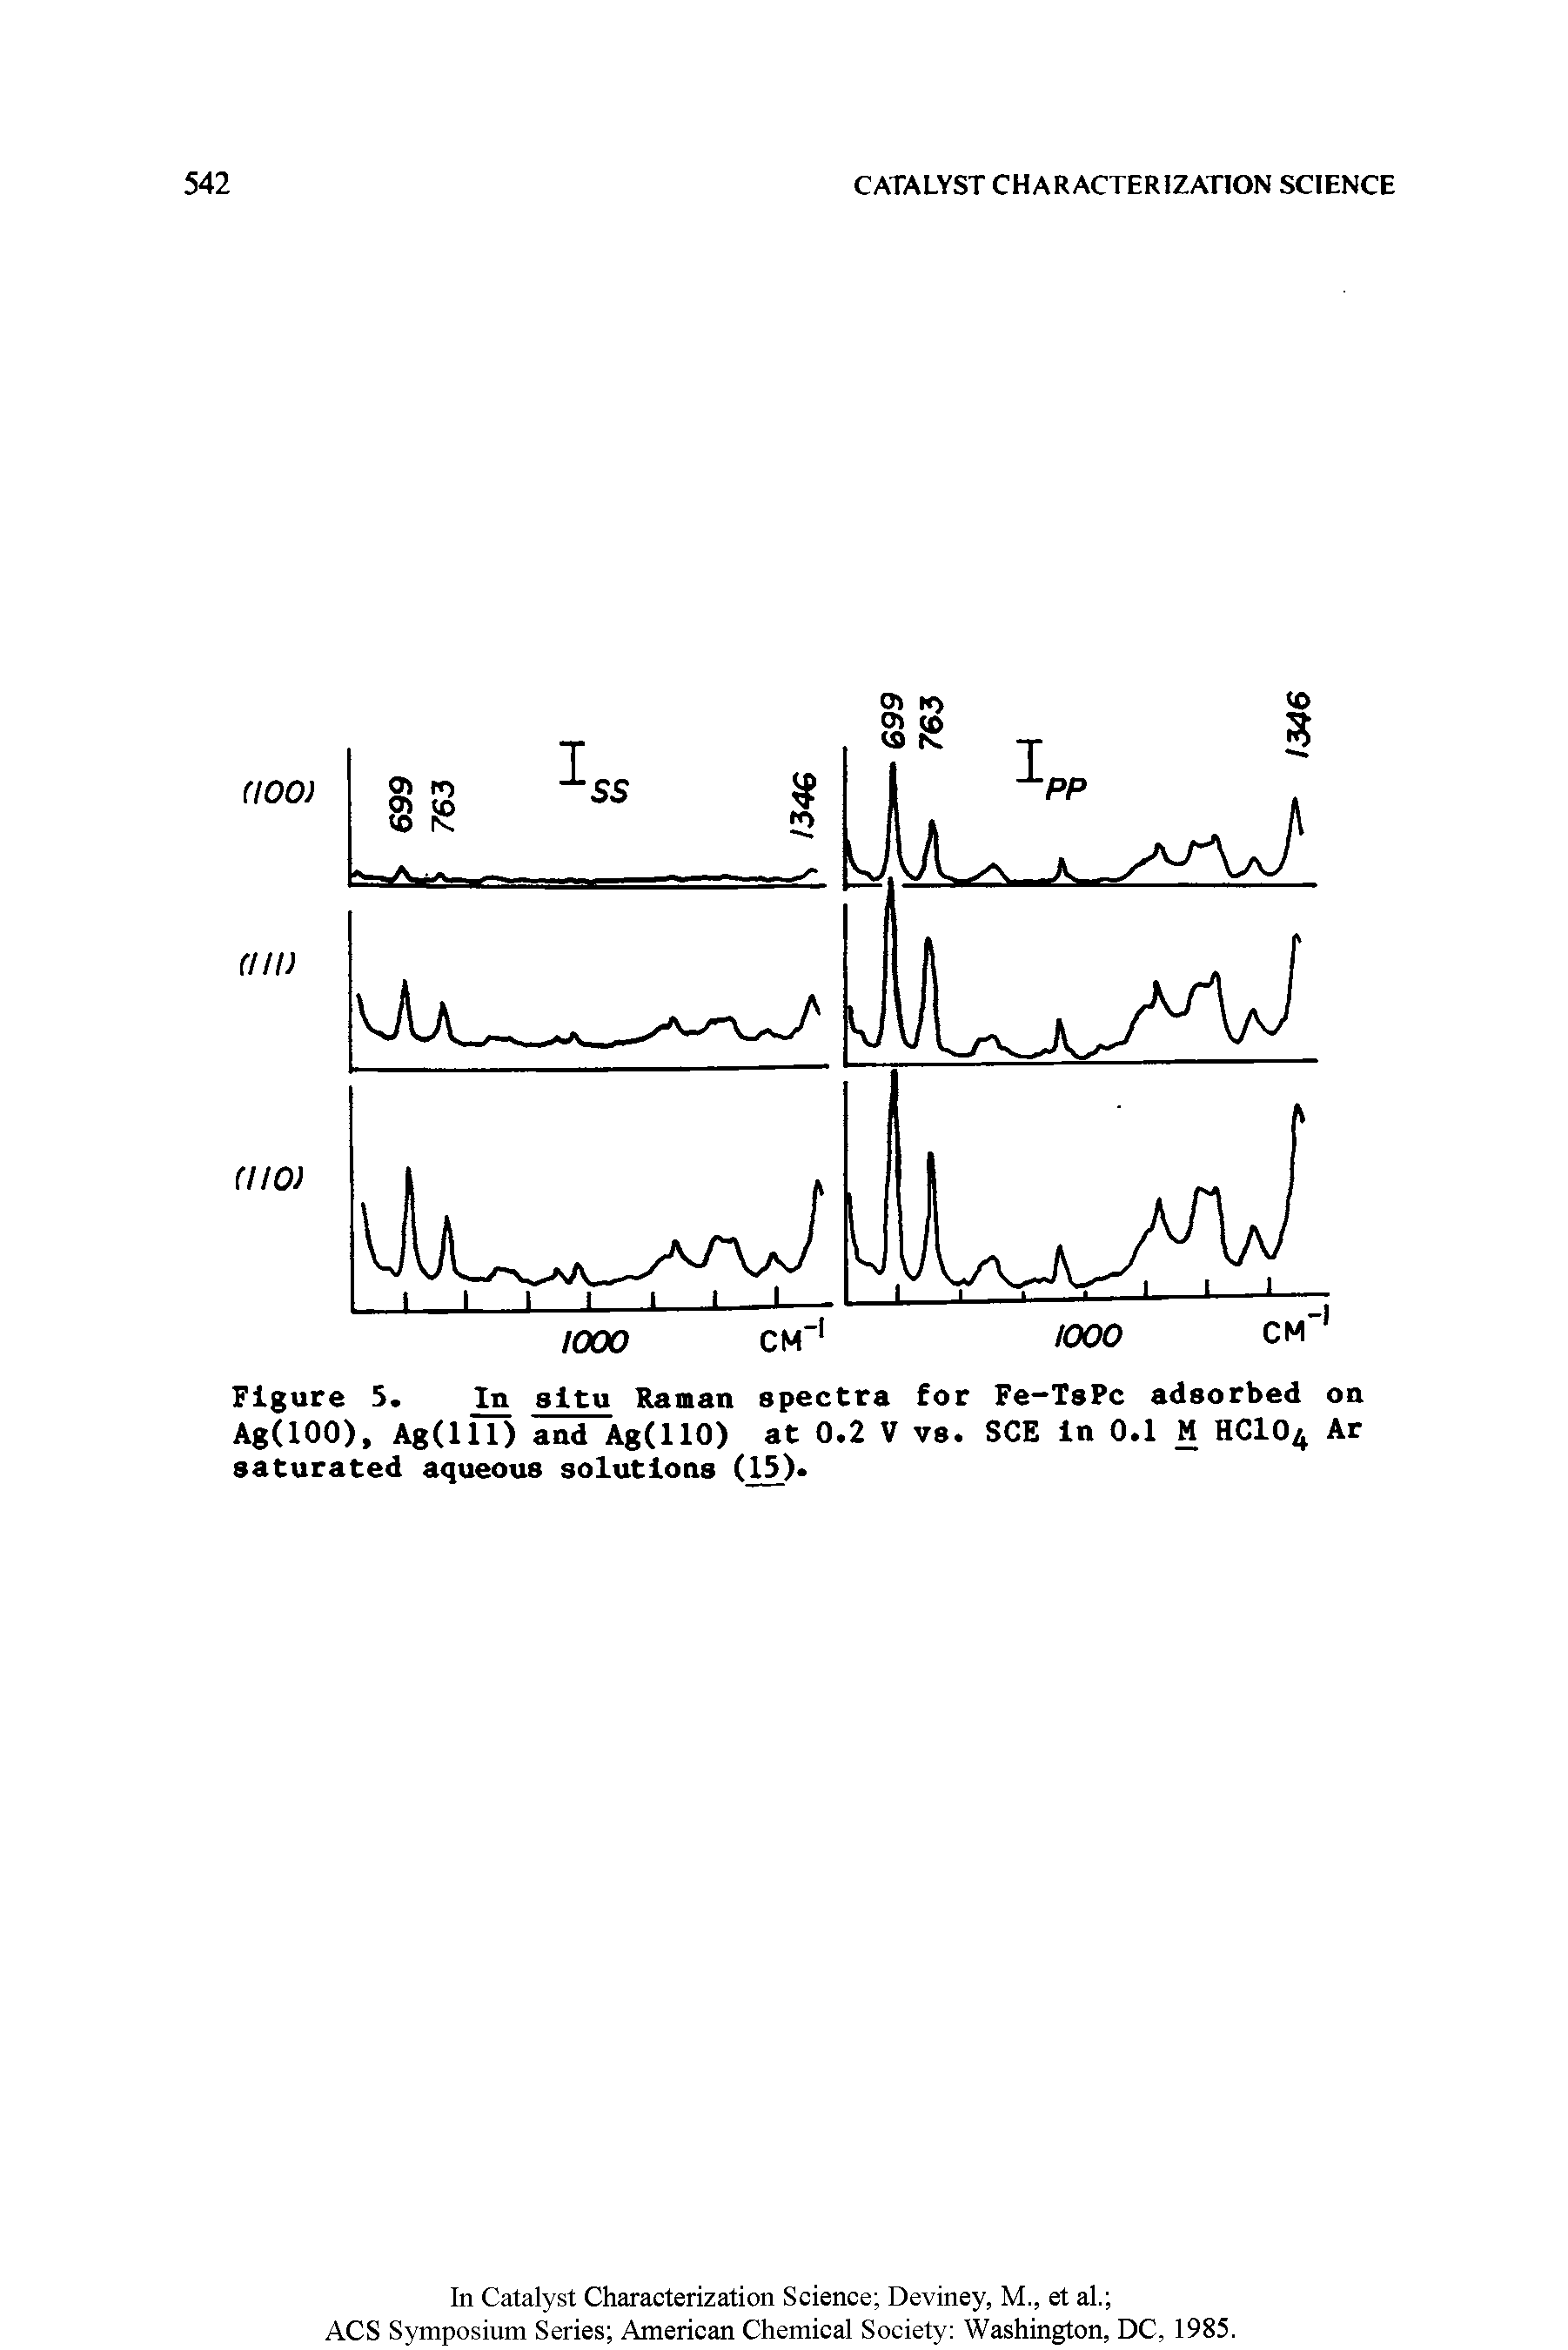 Figure 5, In situ Raman spectra for Fe-TsPc adsorbed on Ag(lOO), Ag(lll) and Ag(llO) at 0.2 V vs. SCE in 0.1 M HCIO4 Ar saturated aqueous solutions (15).